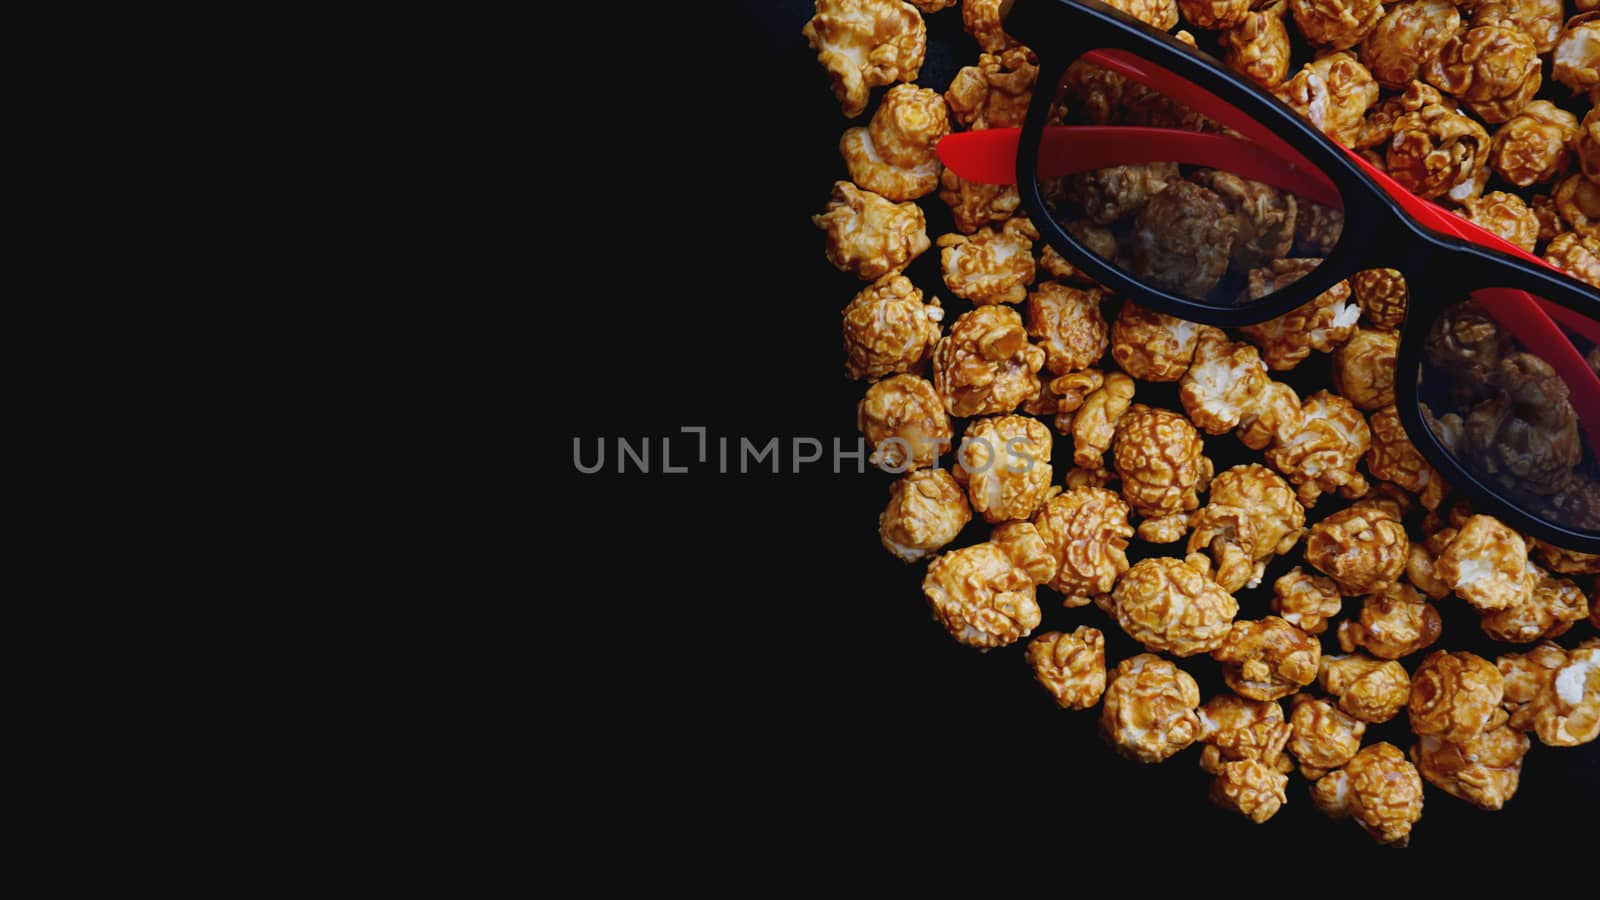 Abstract image of viewer, 3D glasses and popcorn on black background. Still life, top view, flat lay. Concept cinema and entertainment